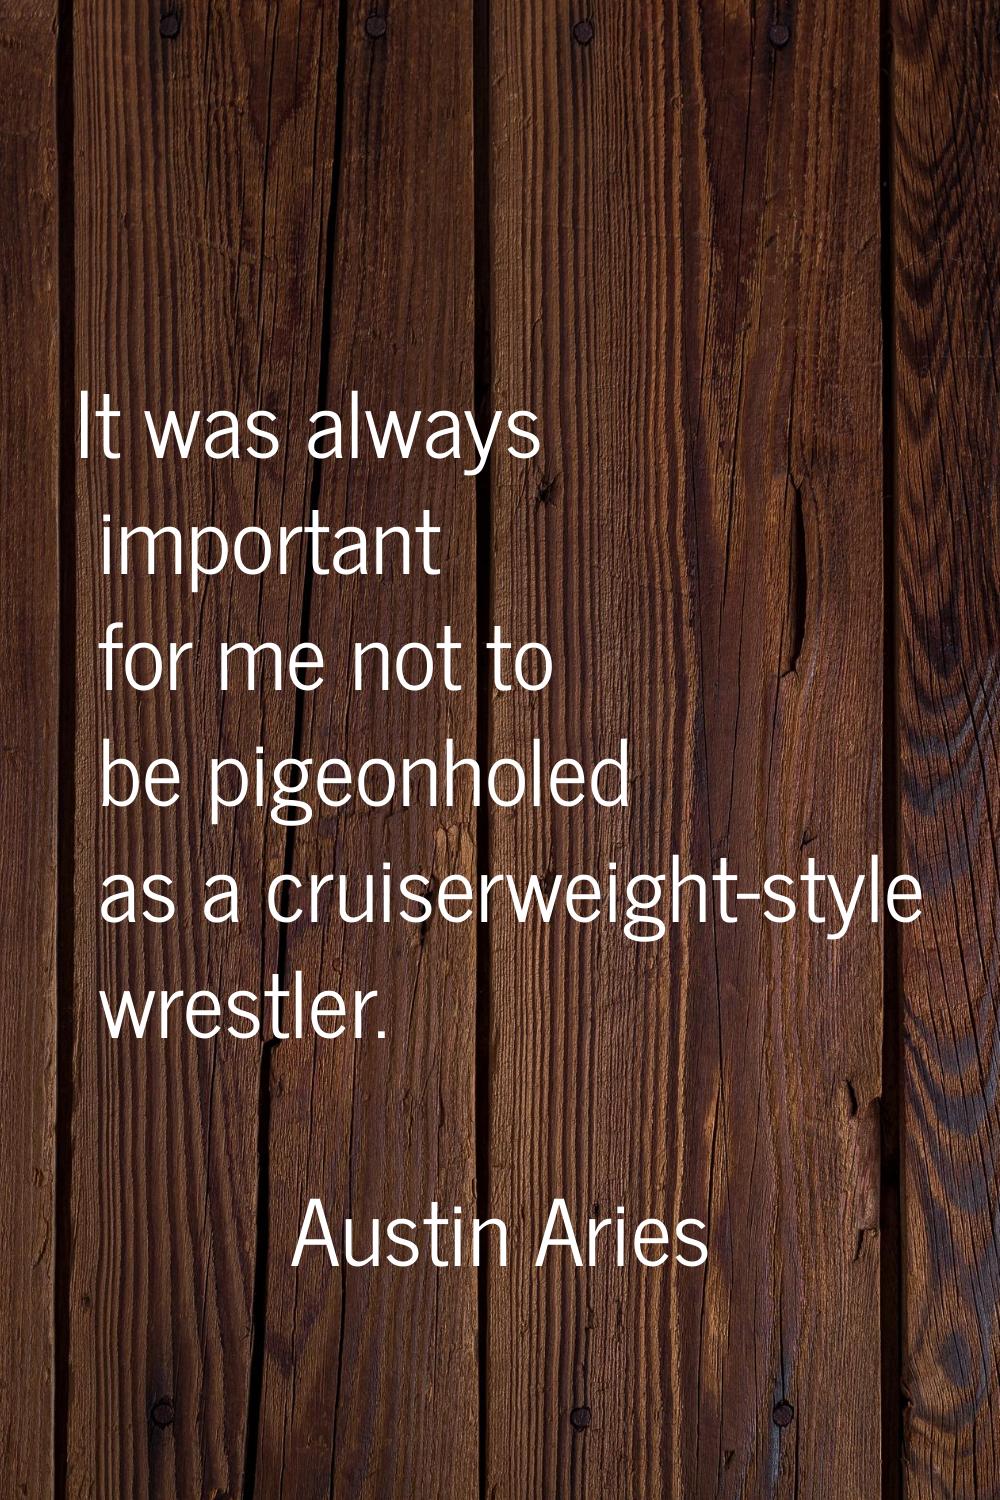 It was always important for me not to be pigeonholed as a cruiserweight-style wrestler.